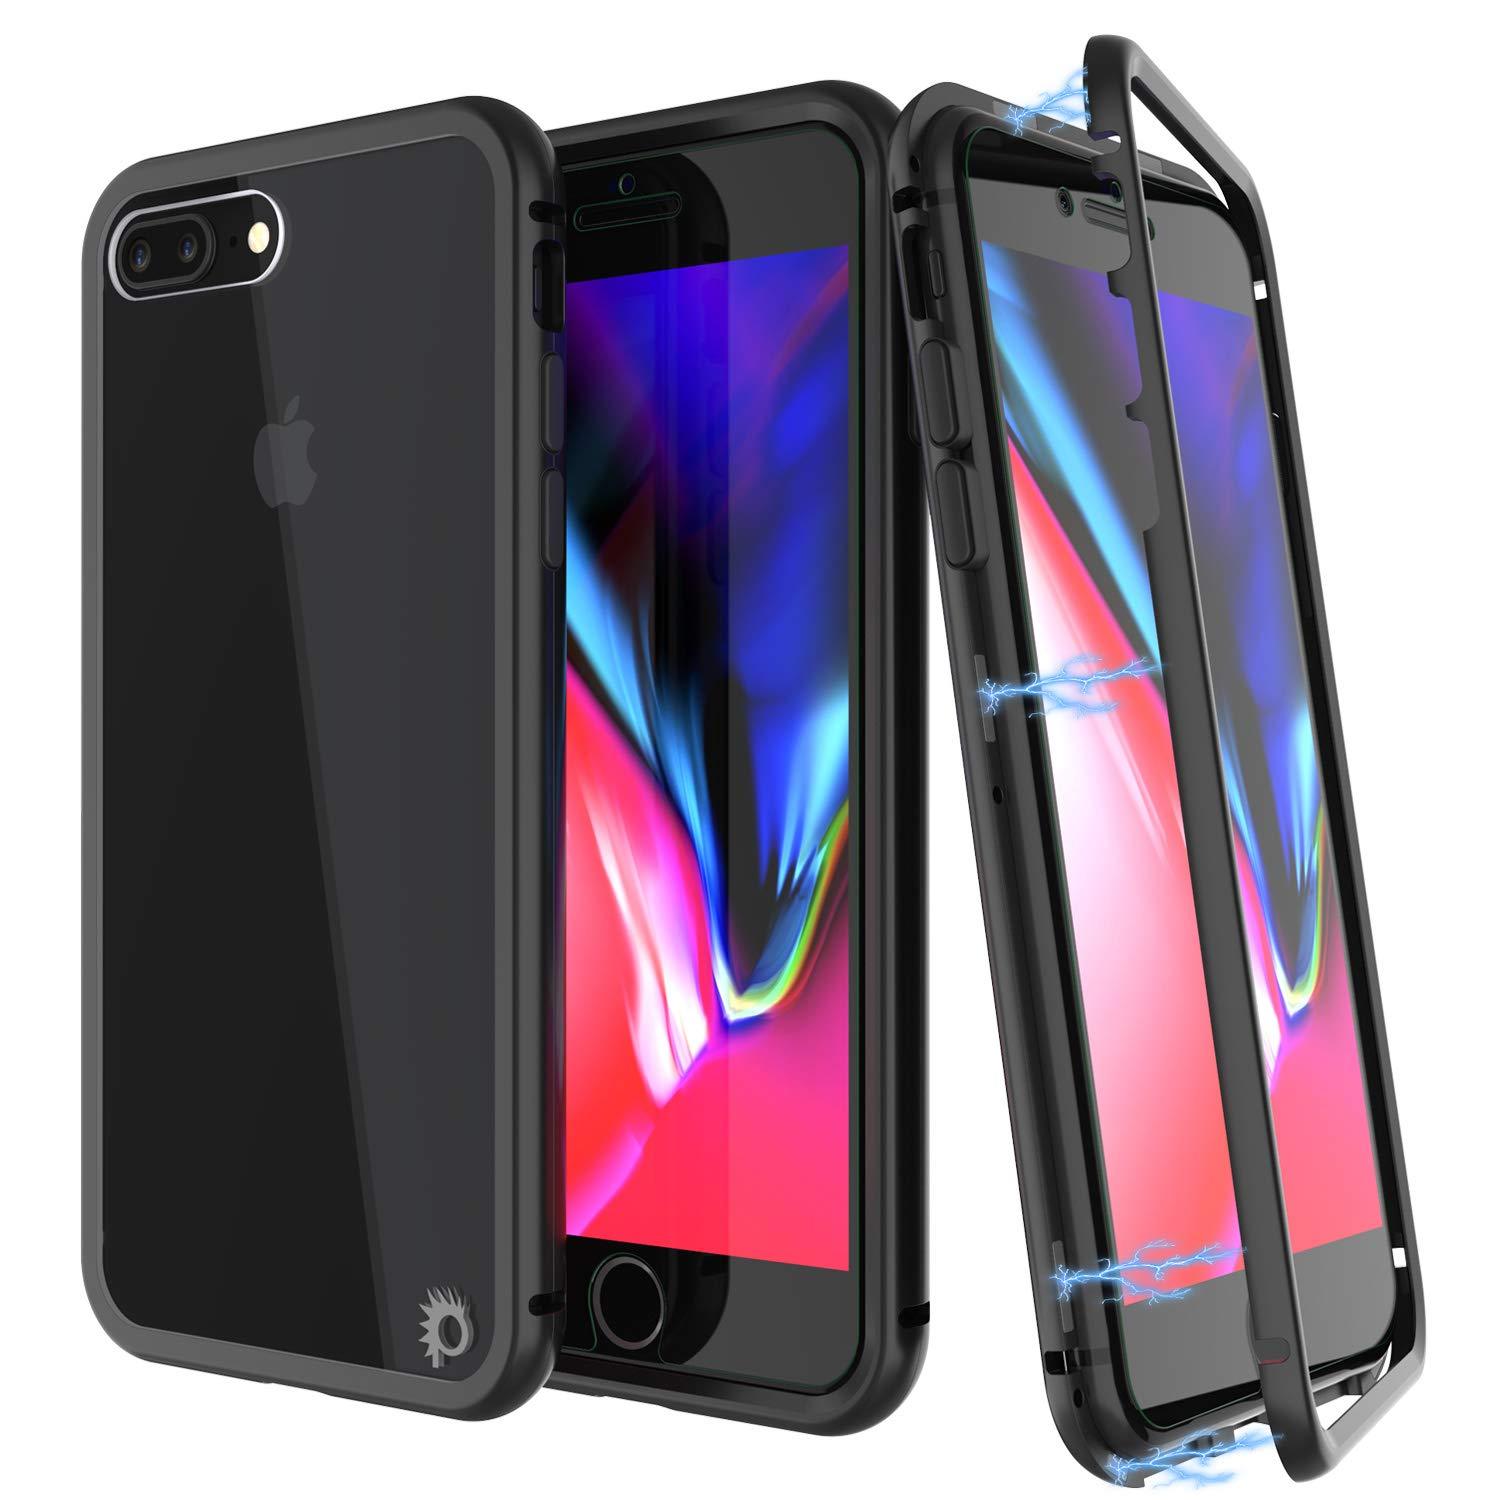 iPhone 7+ Plus Case, Punkcase Magnetix 2.0 Protective TPU Cover W/ Tempered Glass Screen Protector [Black]